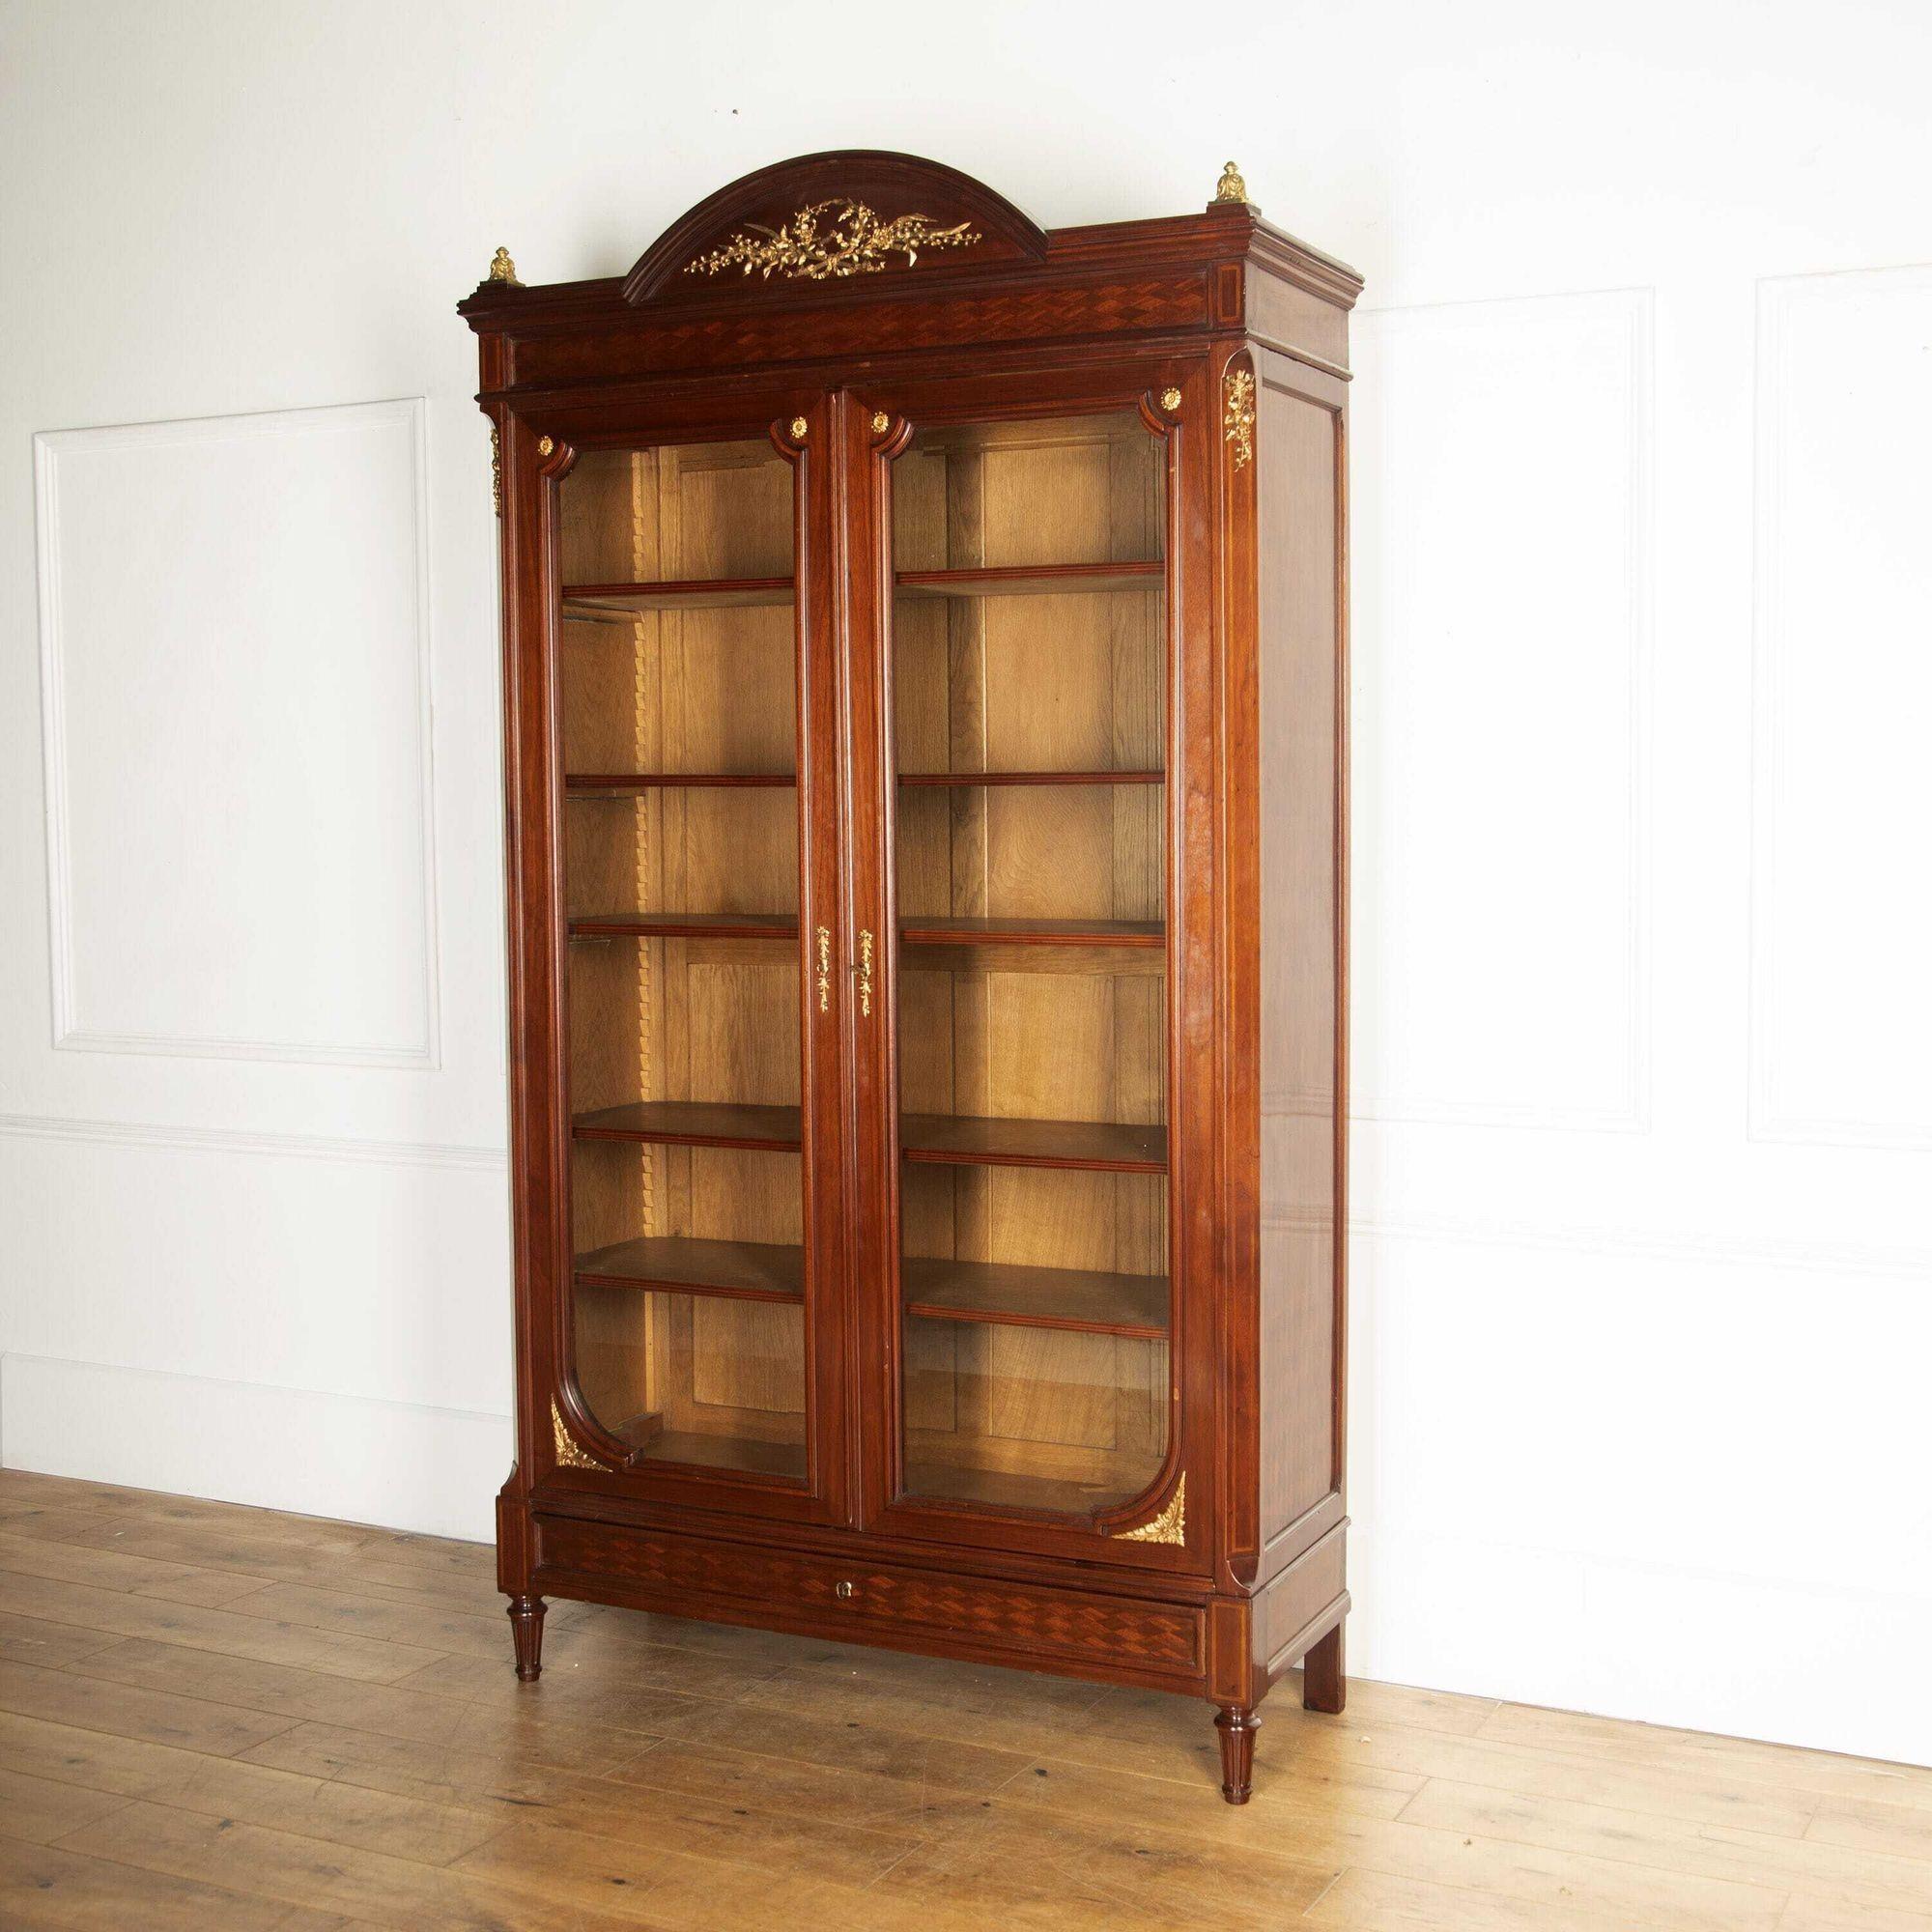 Wonderful late 19th Century two-door mahogany bookcase.
This bookcase is of very fine quality mahogany and has its original ormolu mounts. It has a lovely parquetry design to the side which is typical of 19th Century furniture. 
Has working locks